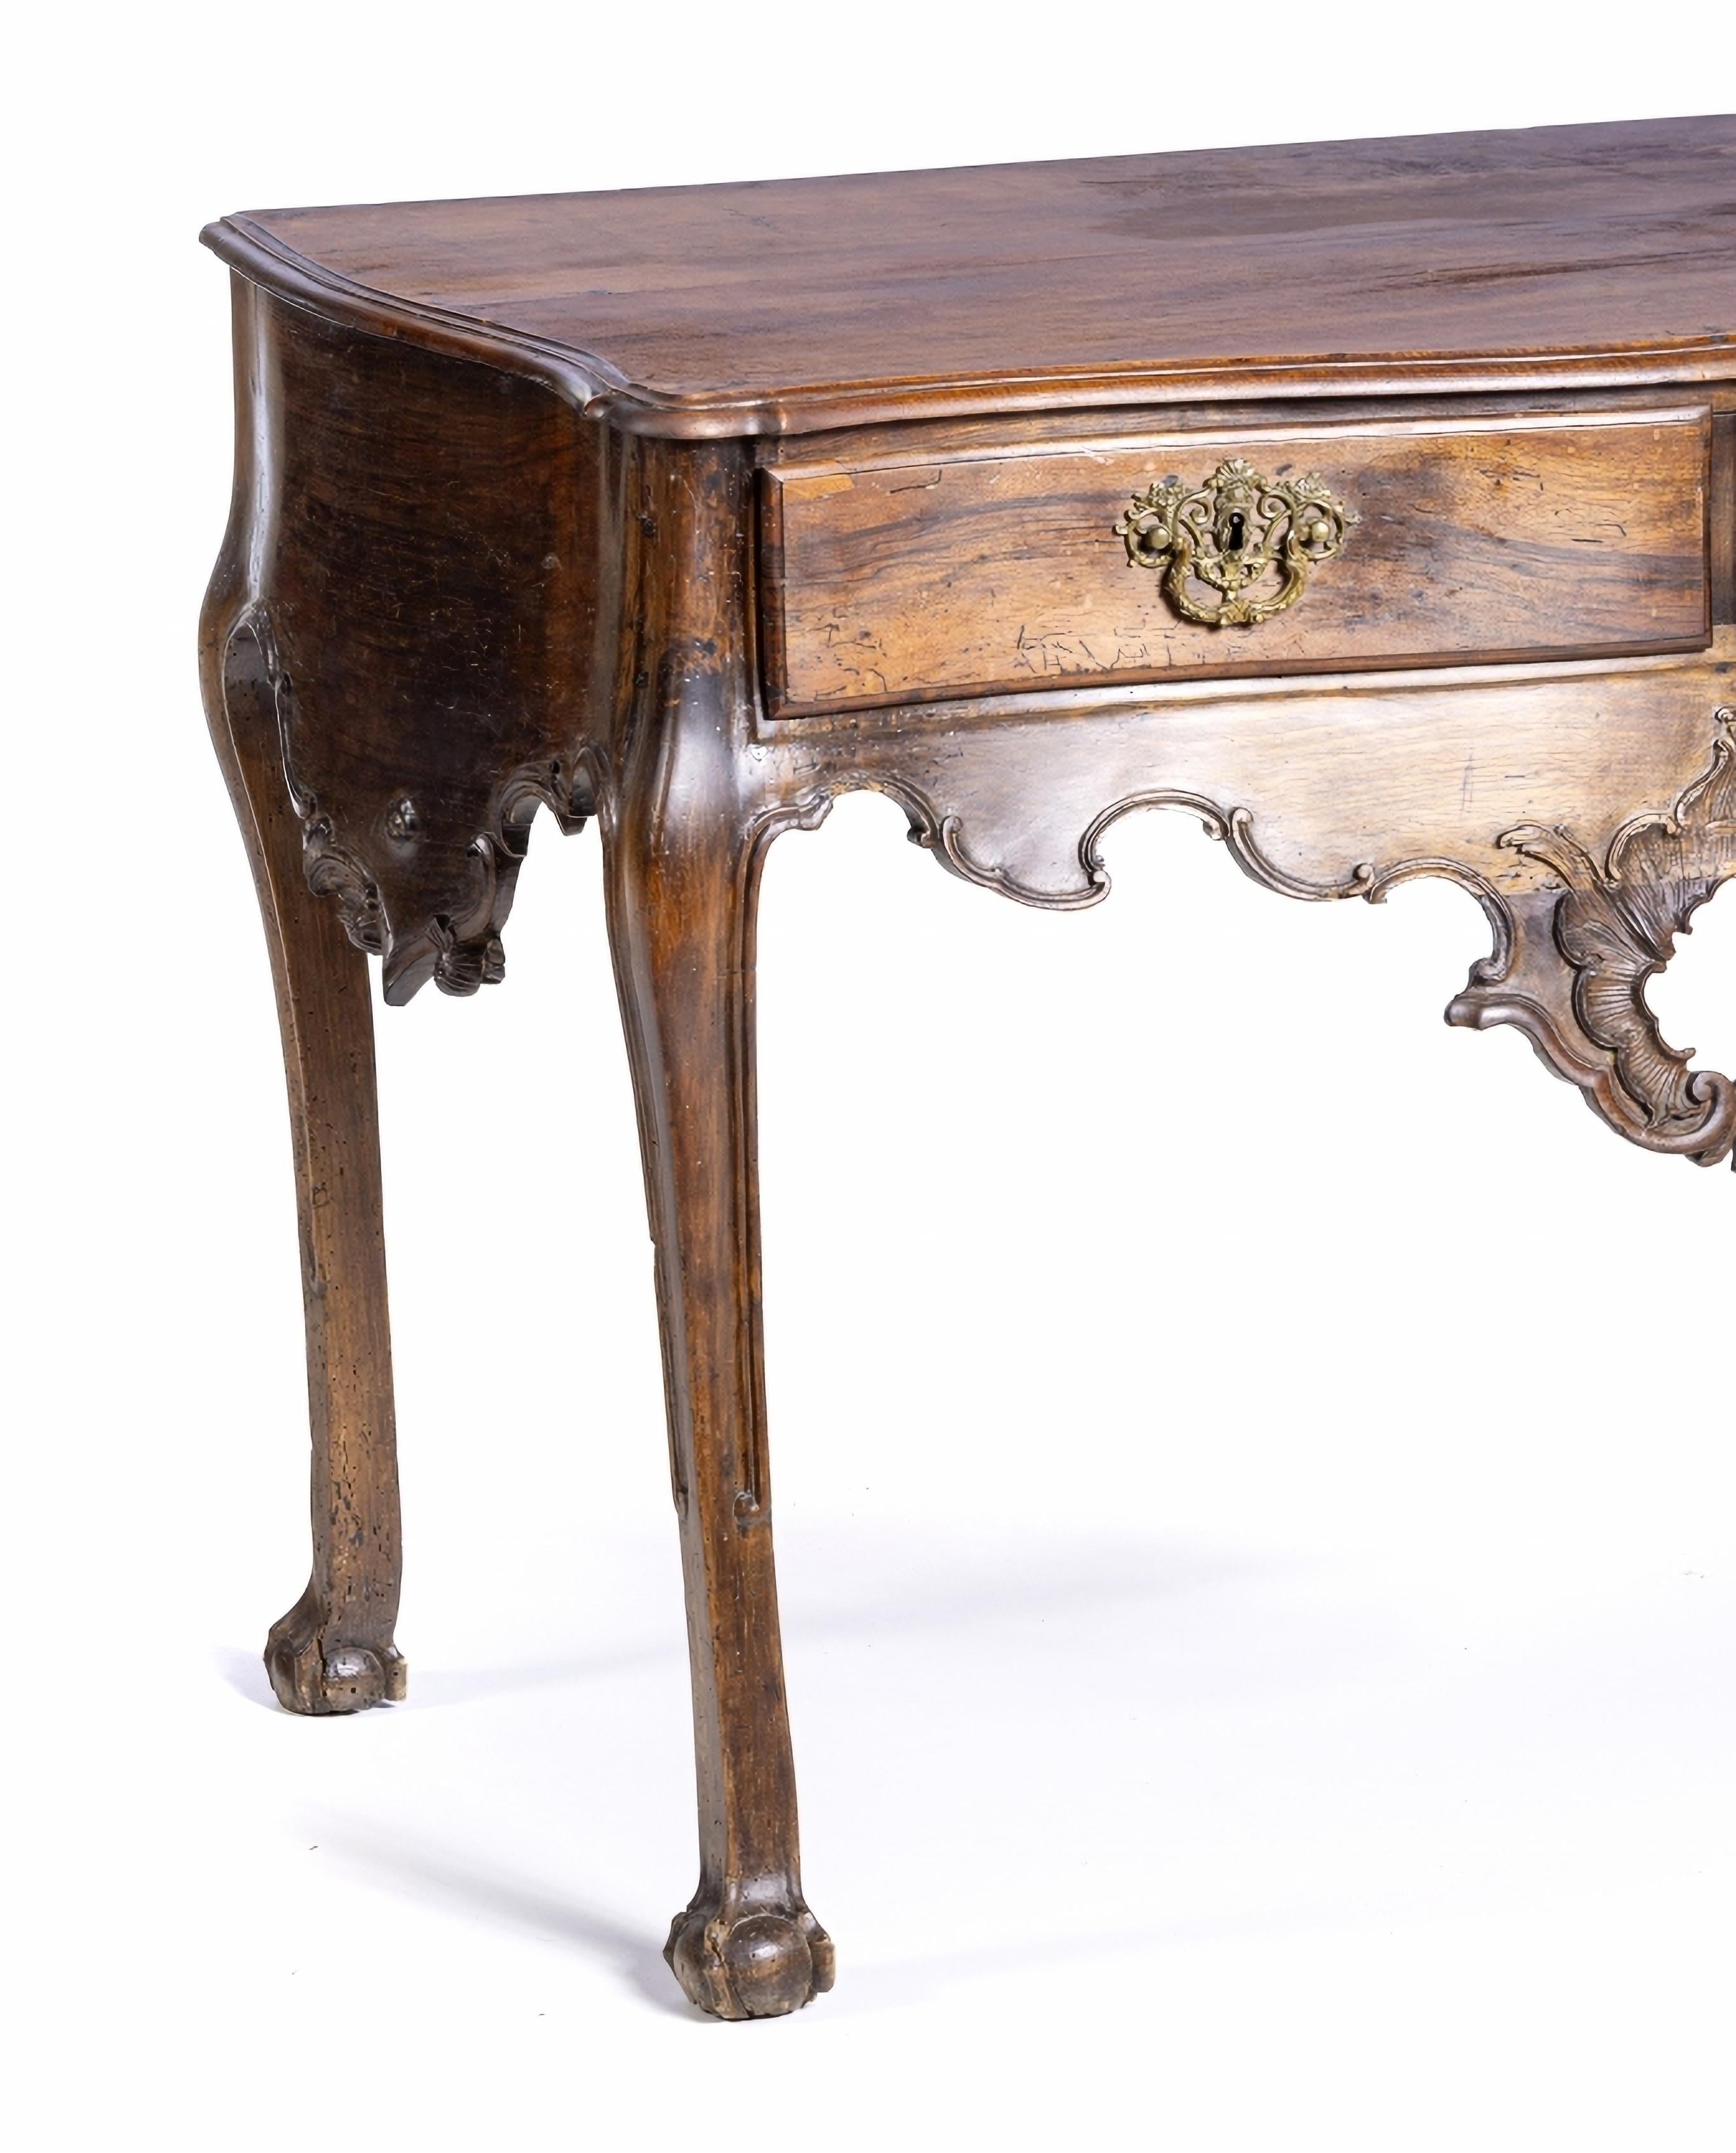 PORTUGUESE  TABLE 18th Century
in walnut wood with a vine top, wavy front with two drawers and cut-out skirts. 
Metal hardware.
Small defects
Dim.: 89 x 120 x 66 cm